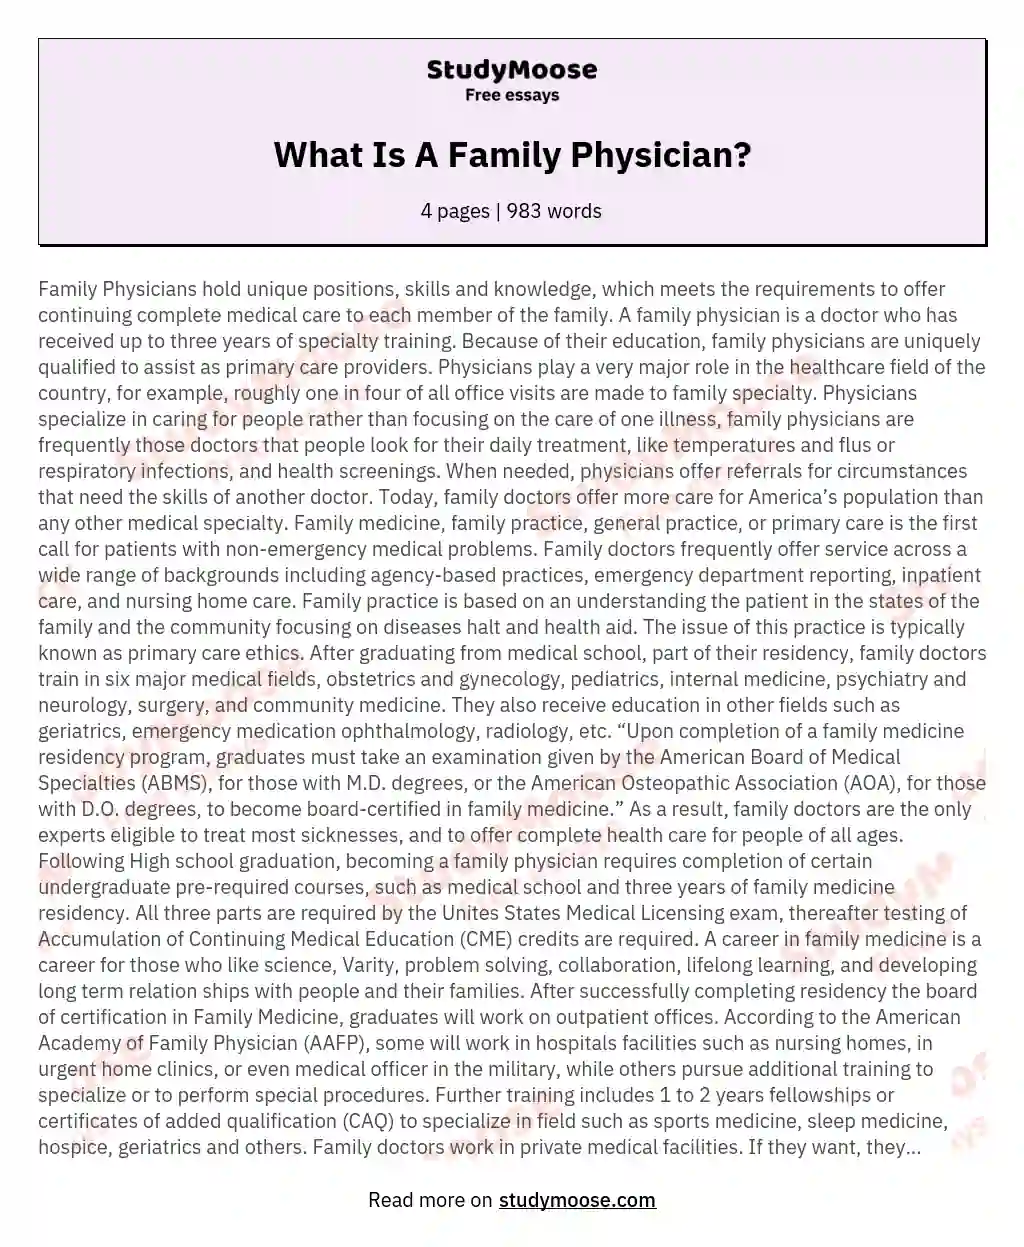 What Is A Family Physician? essay